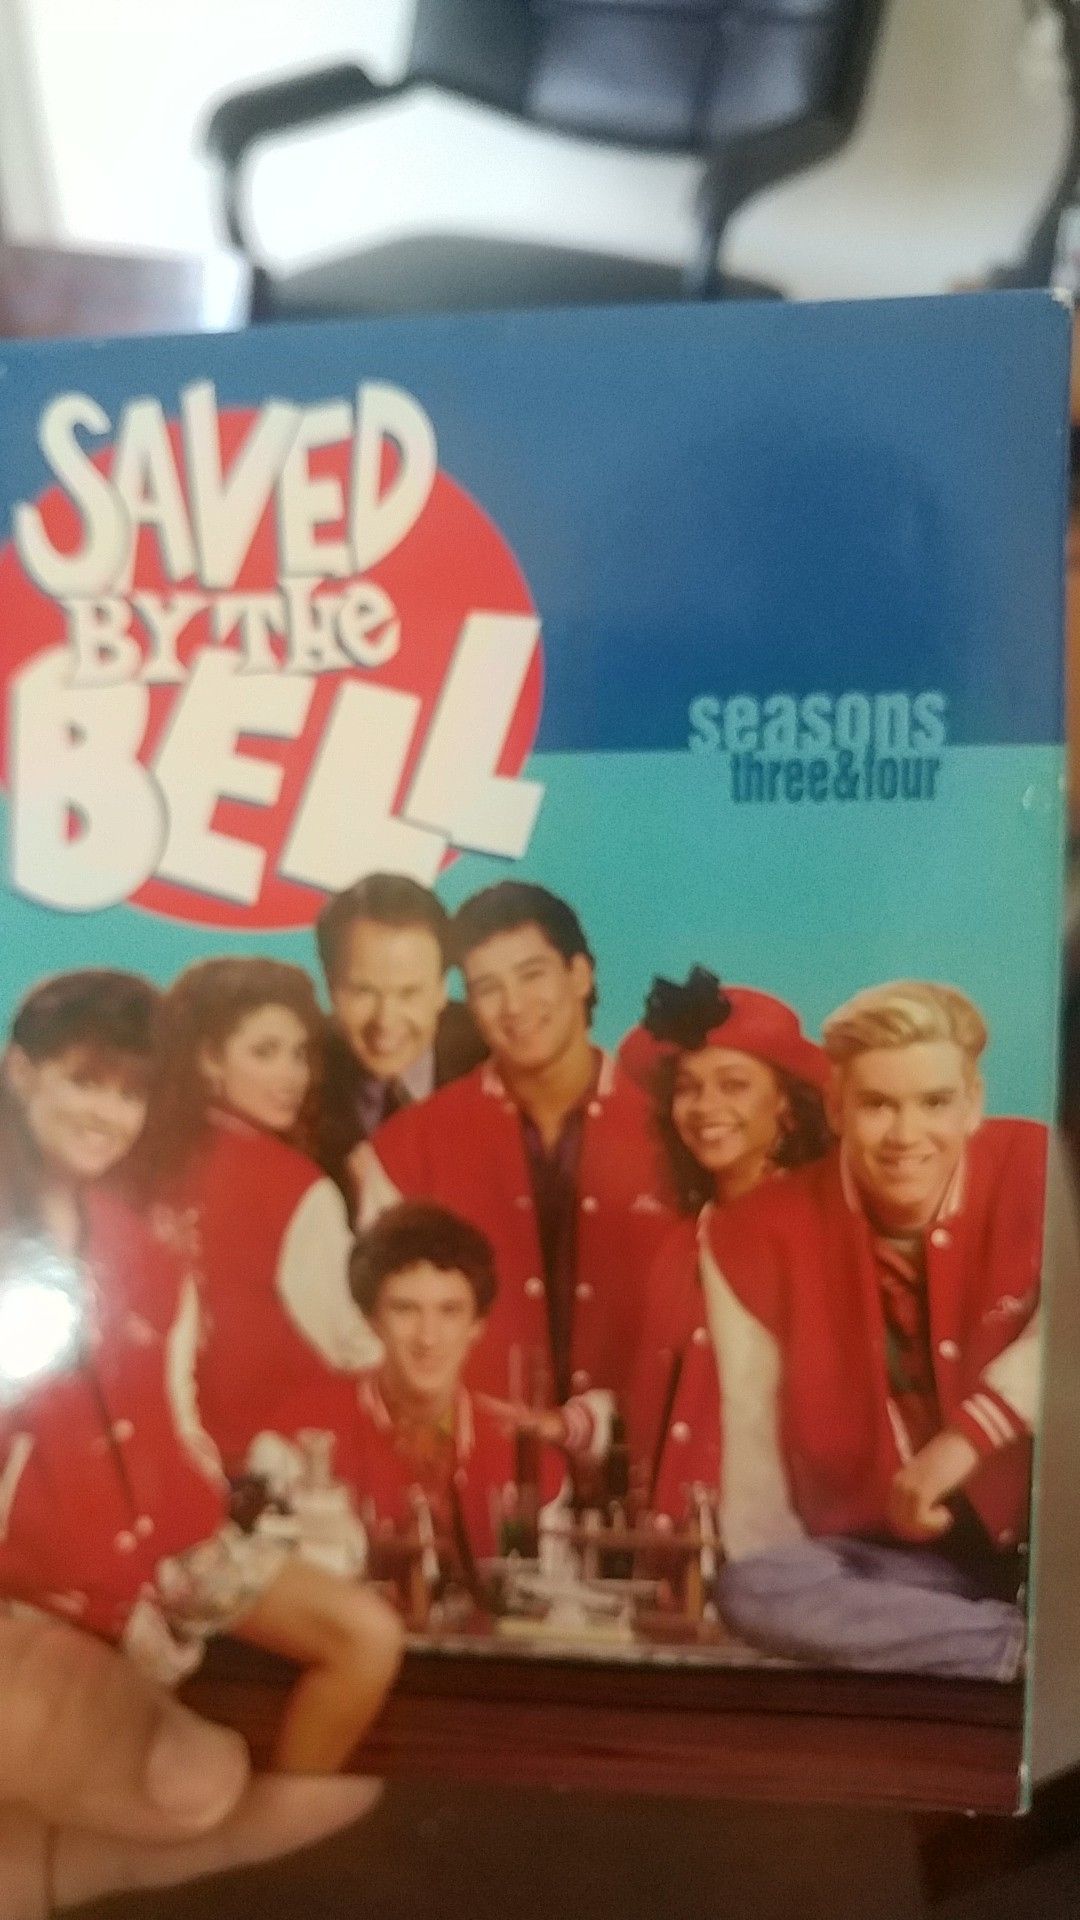 Saved by the Bell DVD Seasons 3 & 4